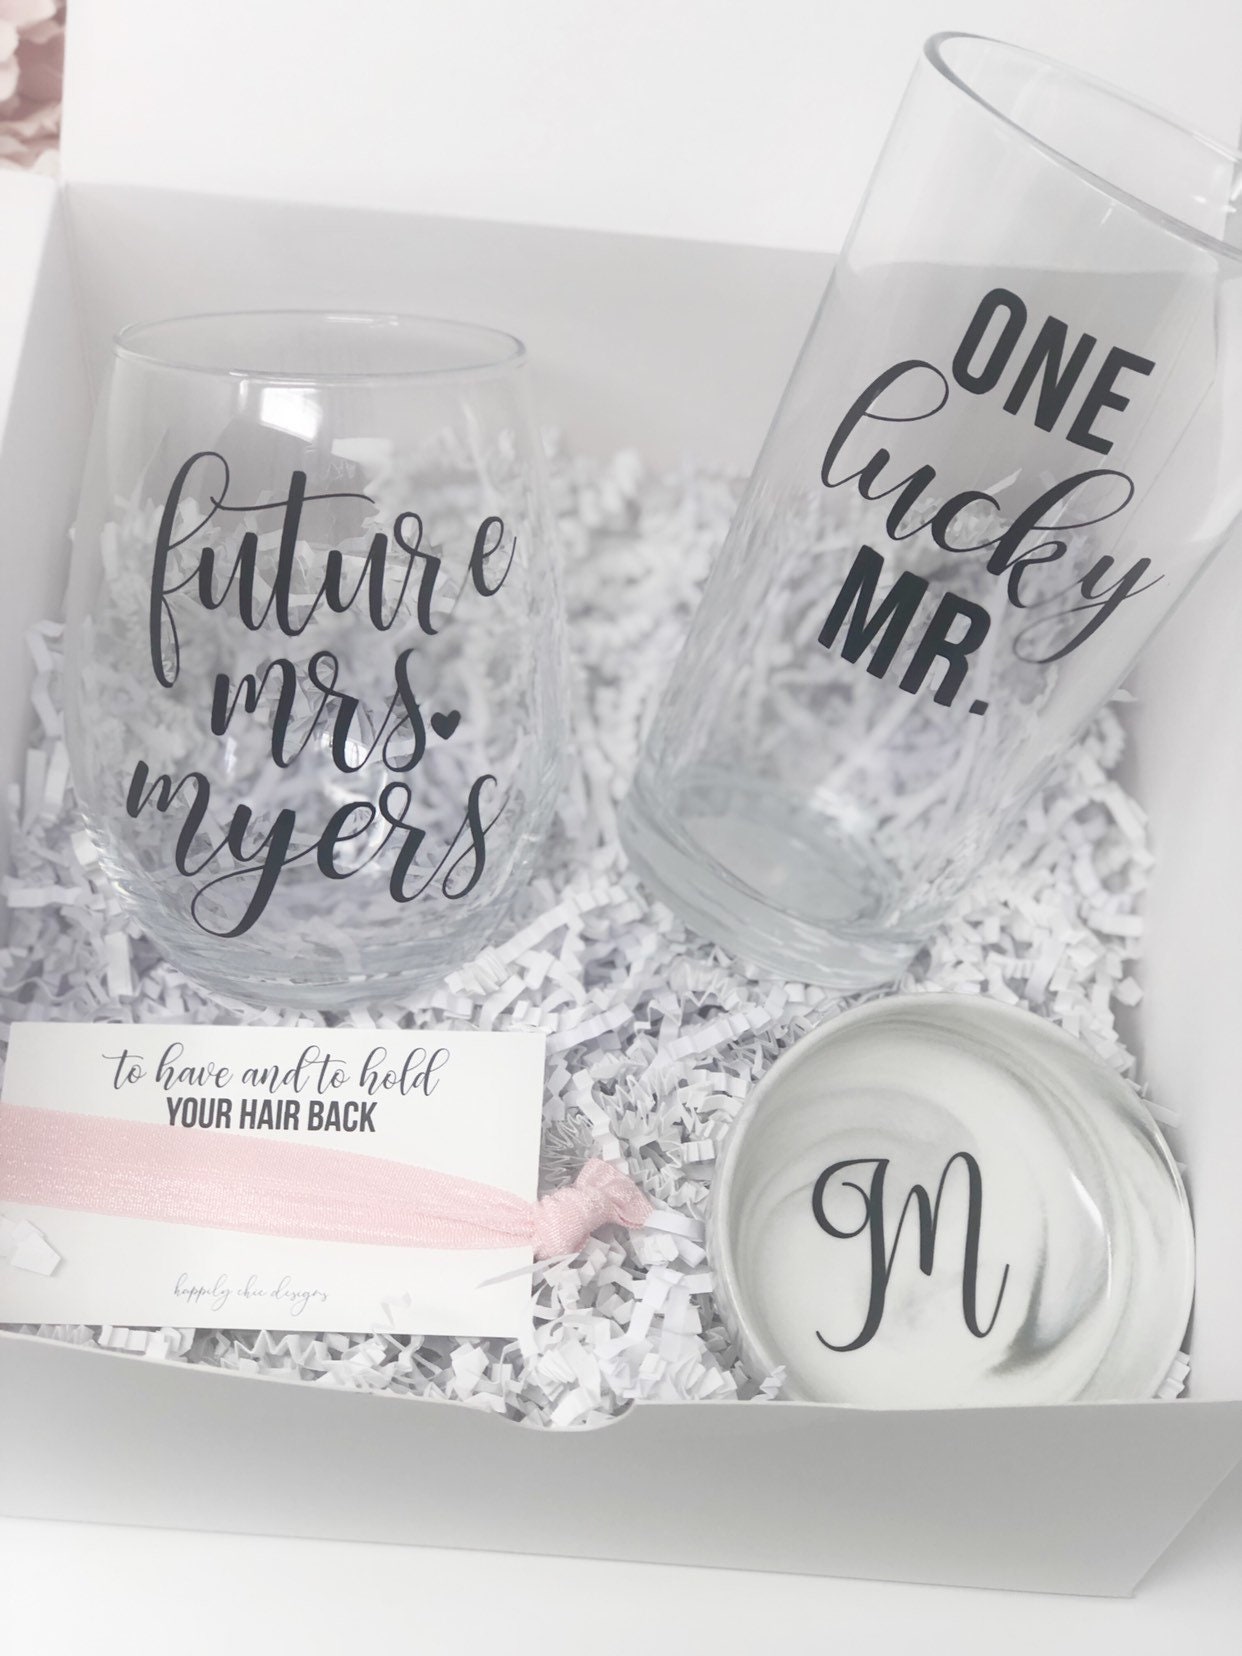 Future mrs one lucky mr wine glass beer glass gift box set